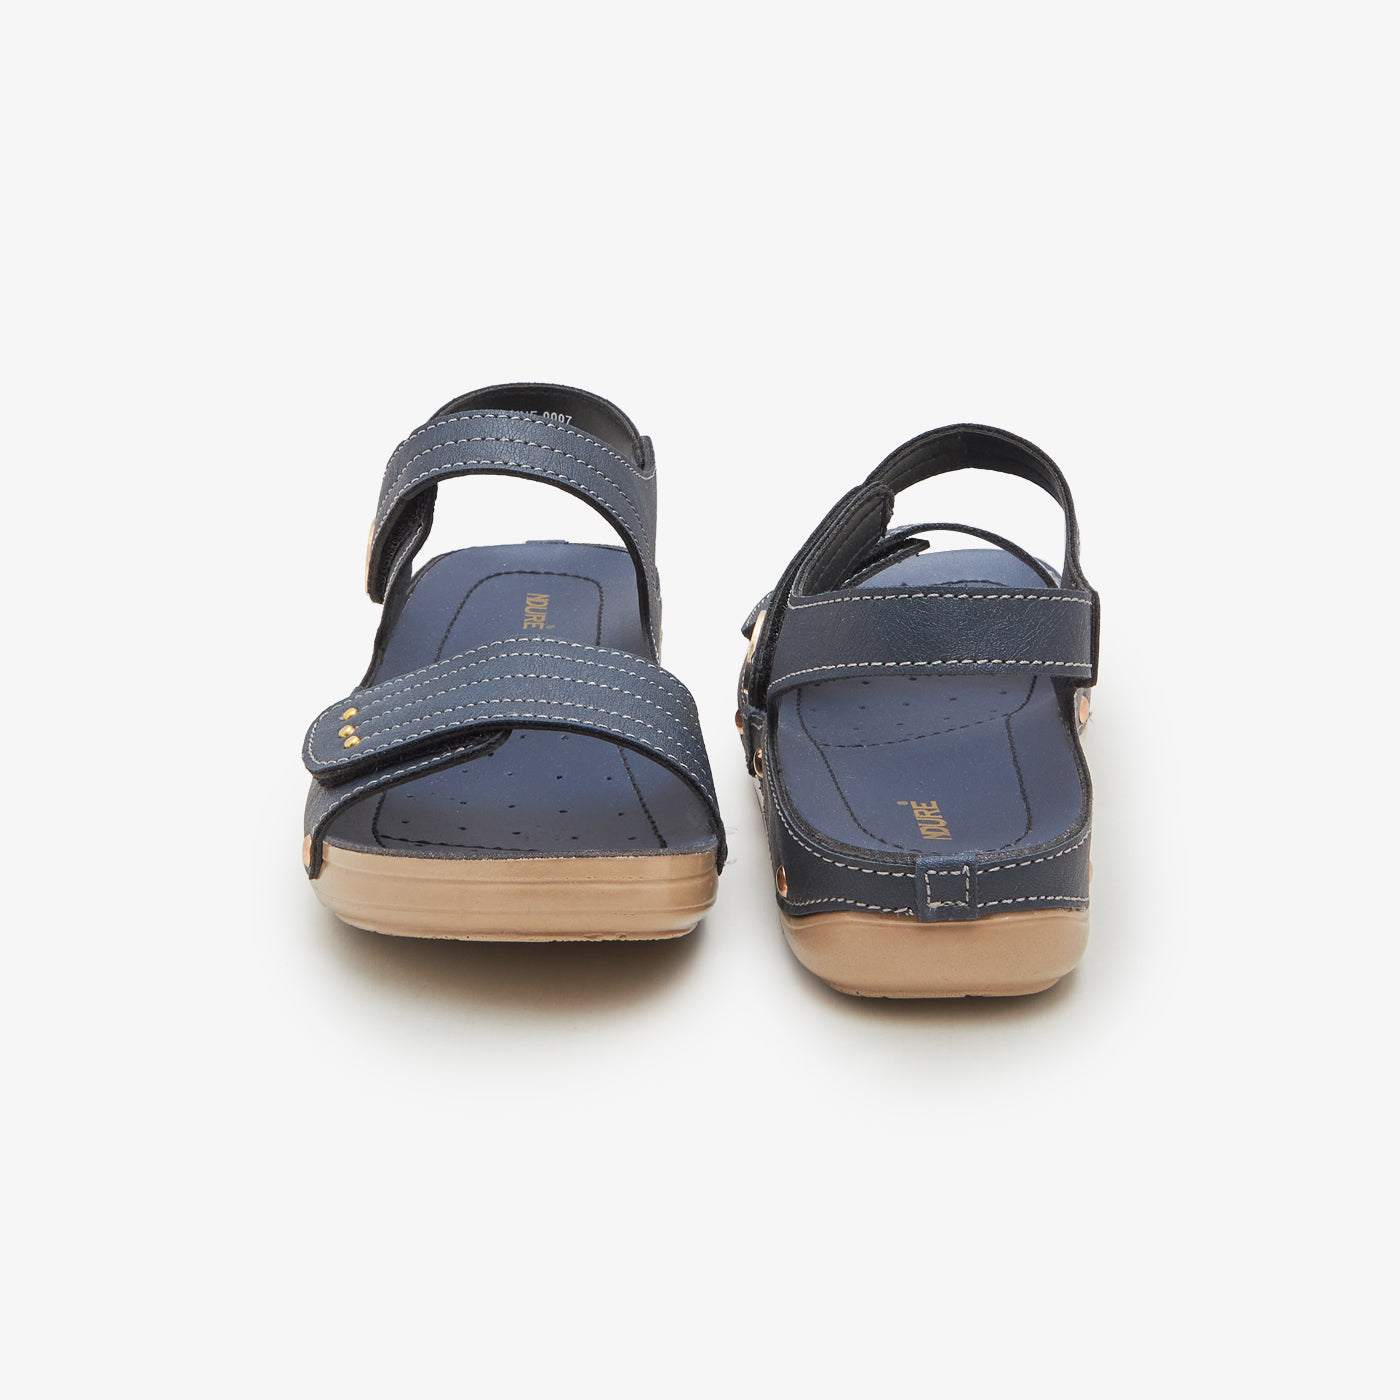 Womens Comfortable Sandals